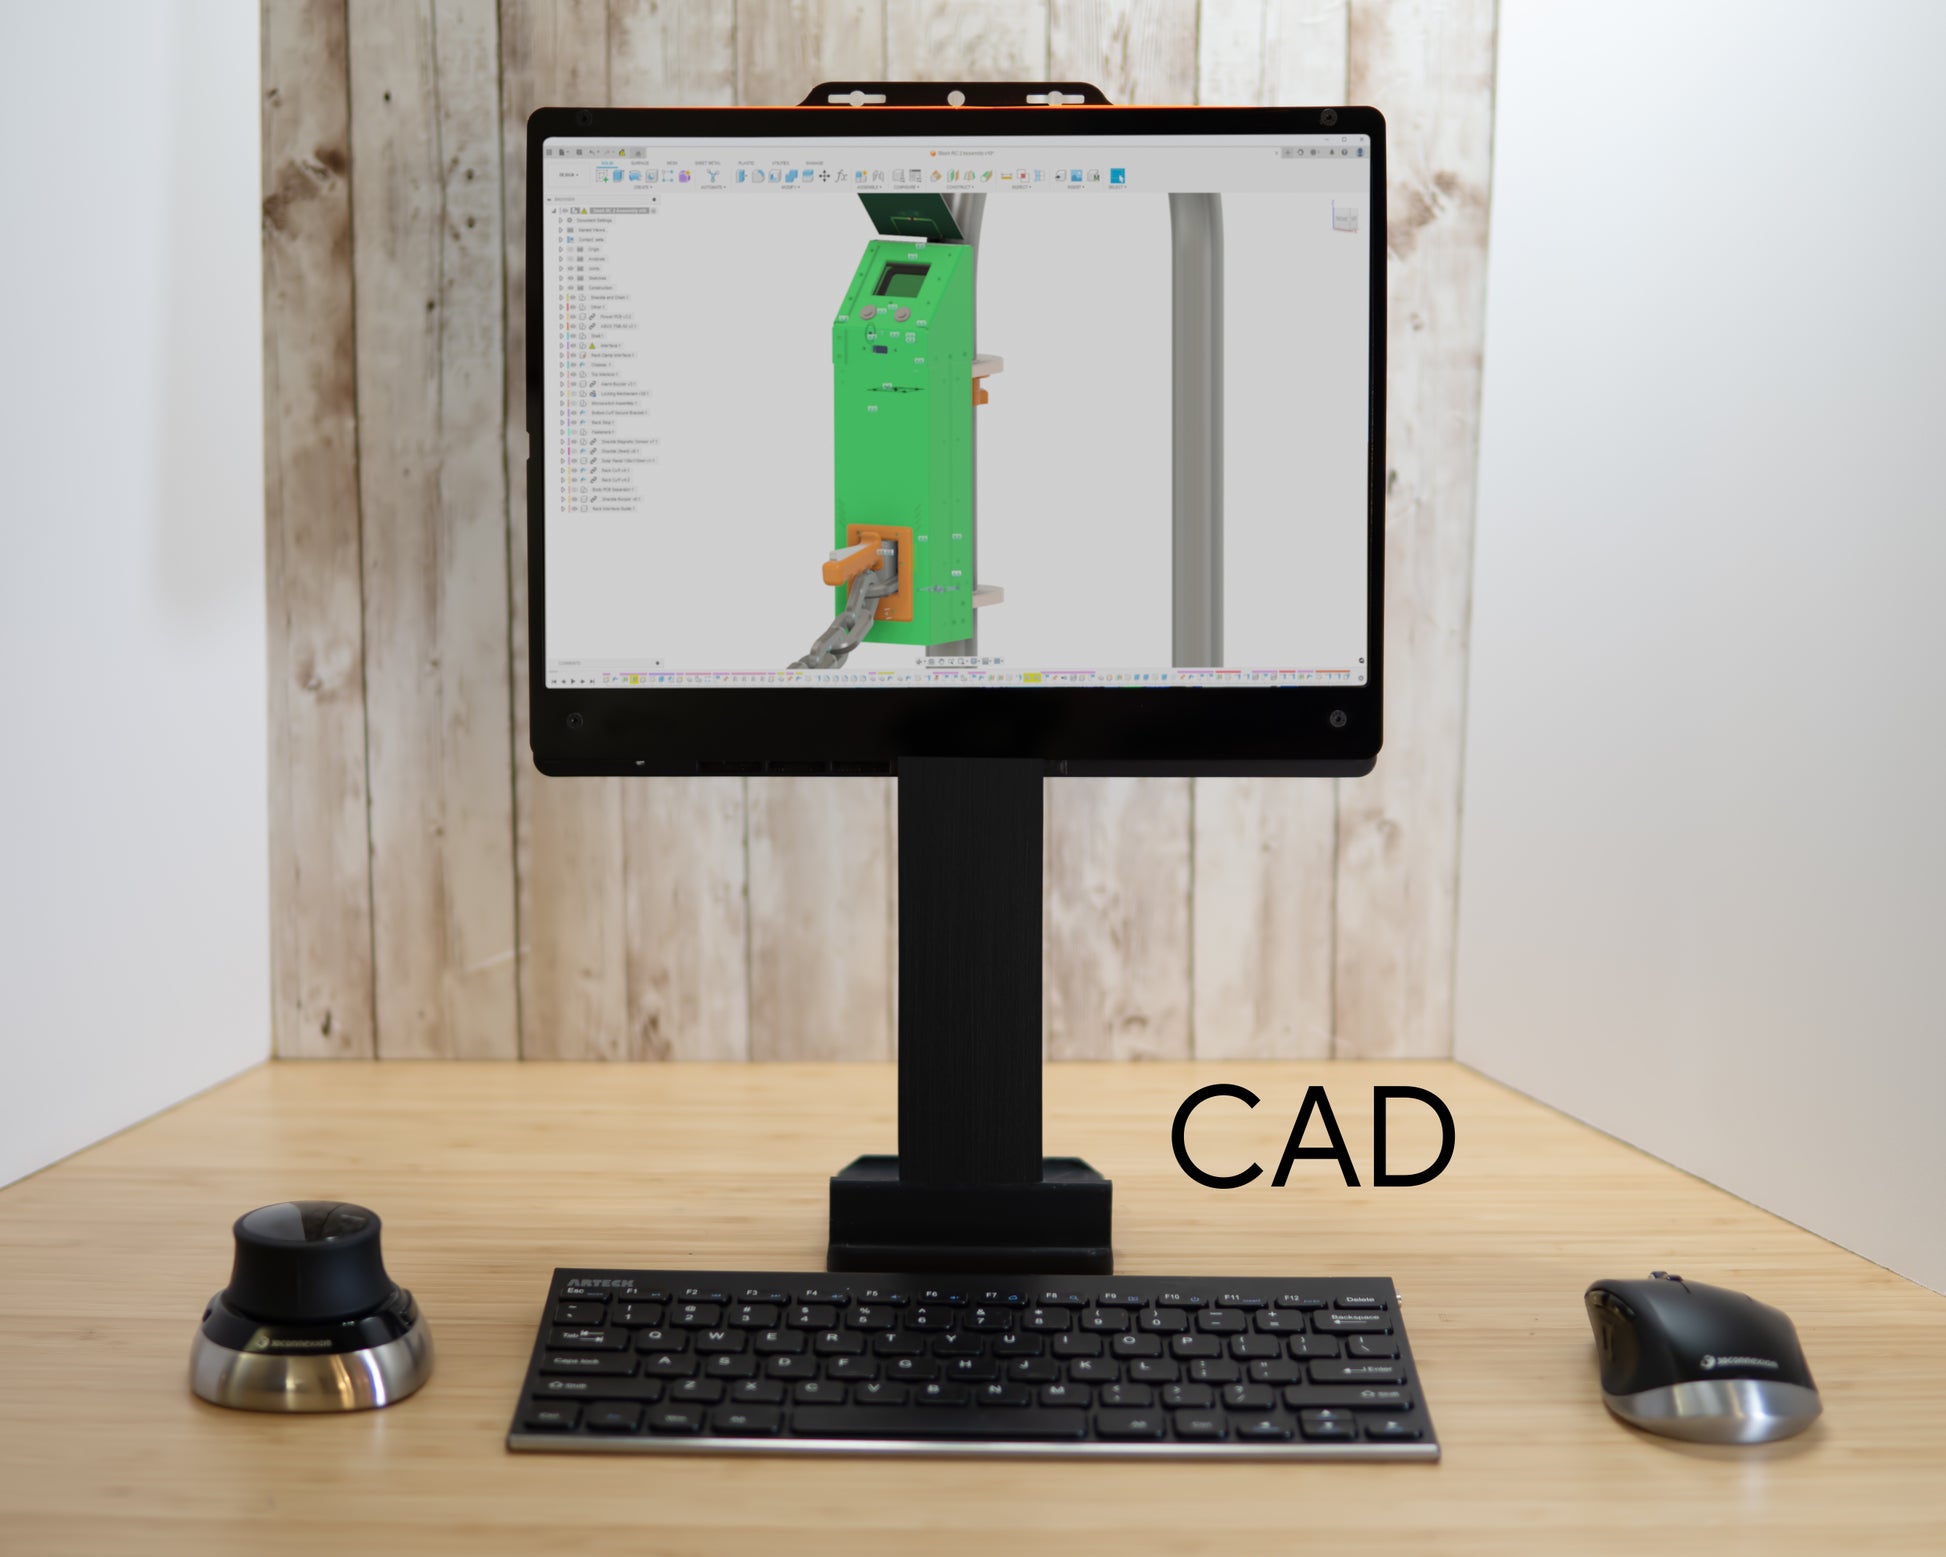 With CAD peripherals